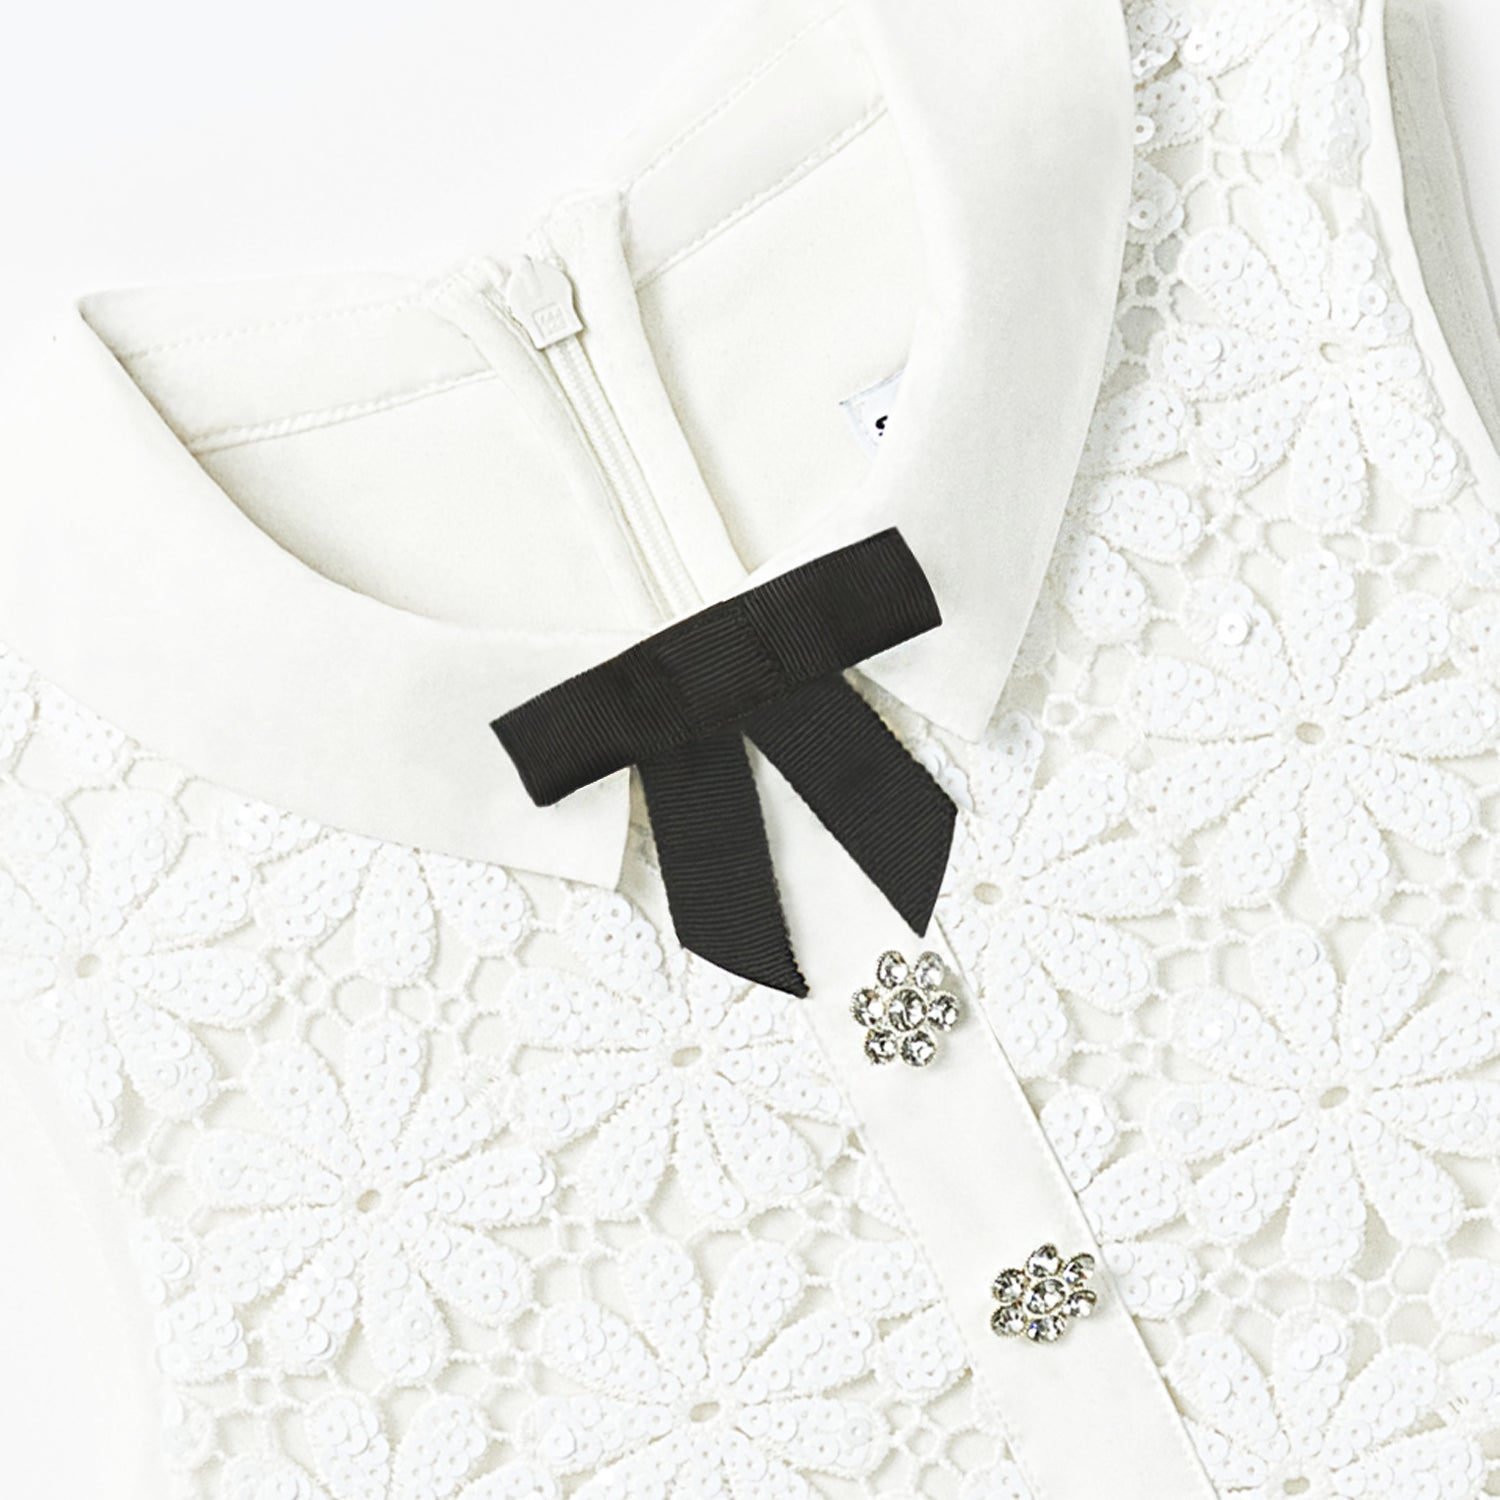 White Sequin Guipure Bow Dress